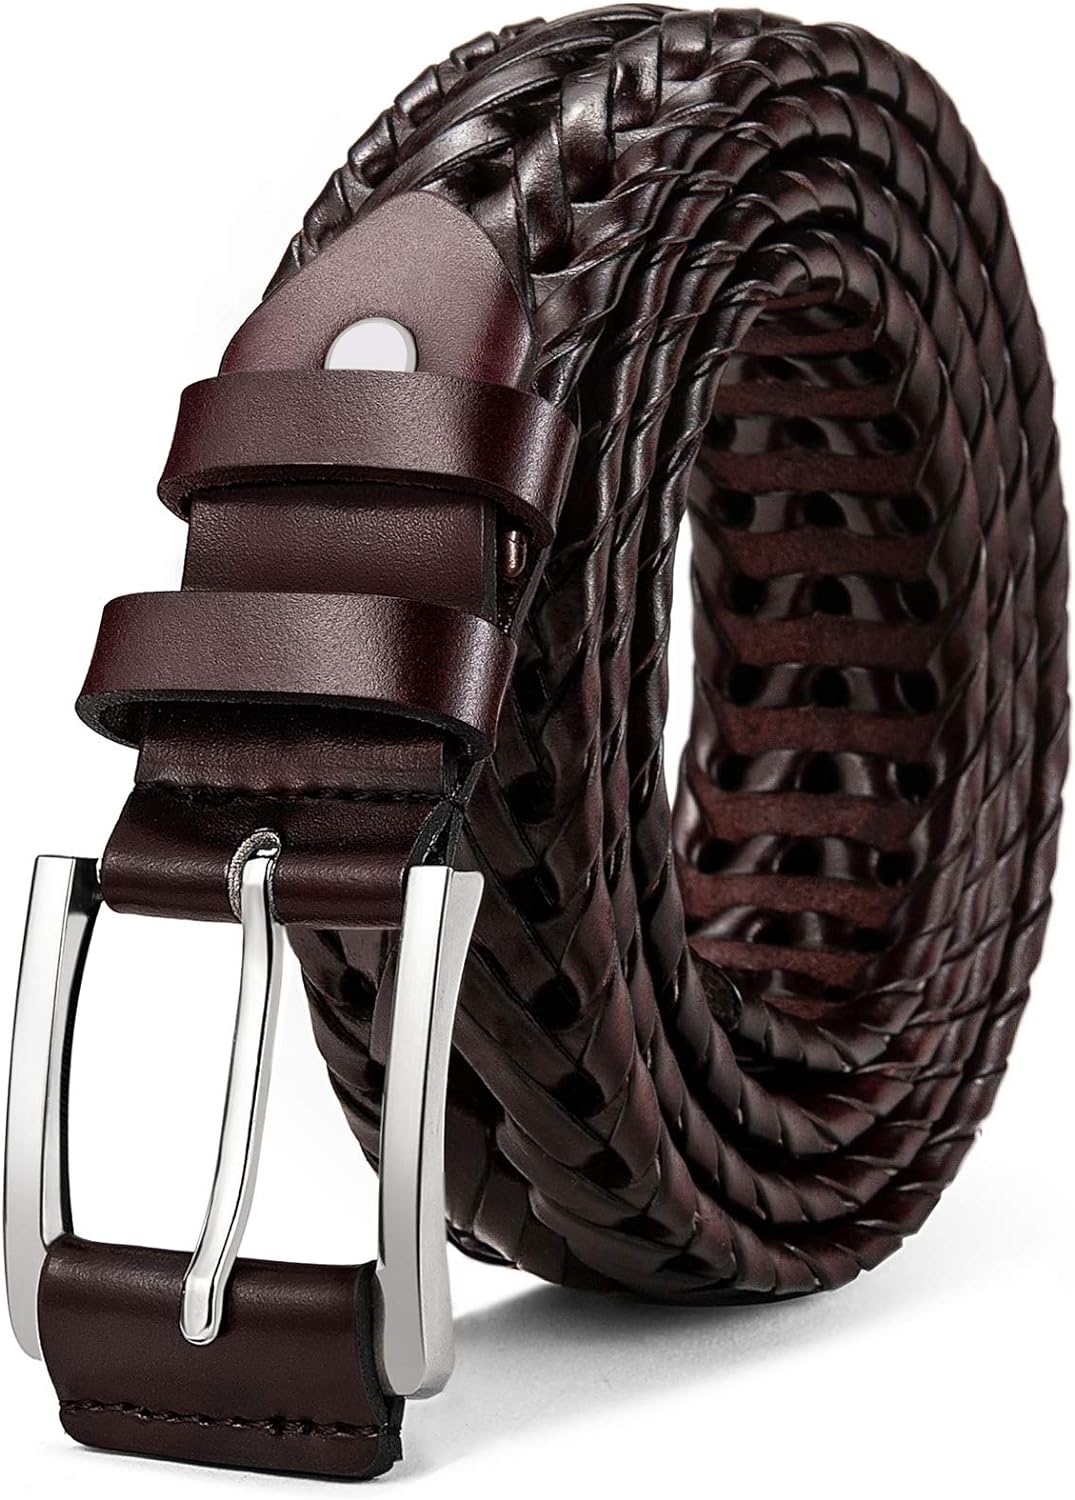 BULLIANT Mens Belts,Leather Woven Braided Belts for Gift Men Casual Jeans Golf